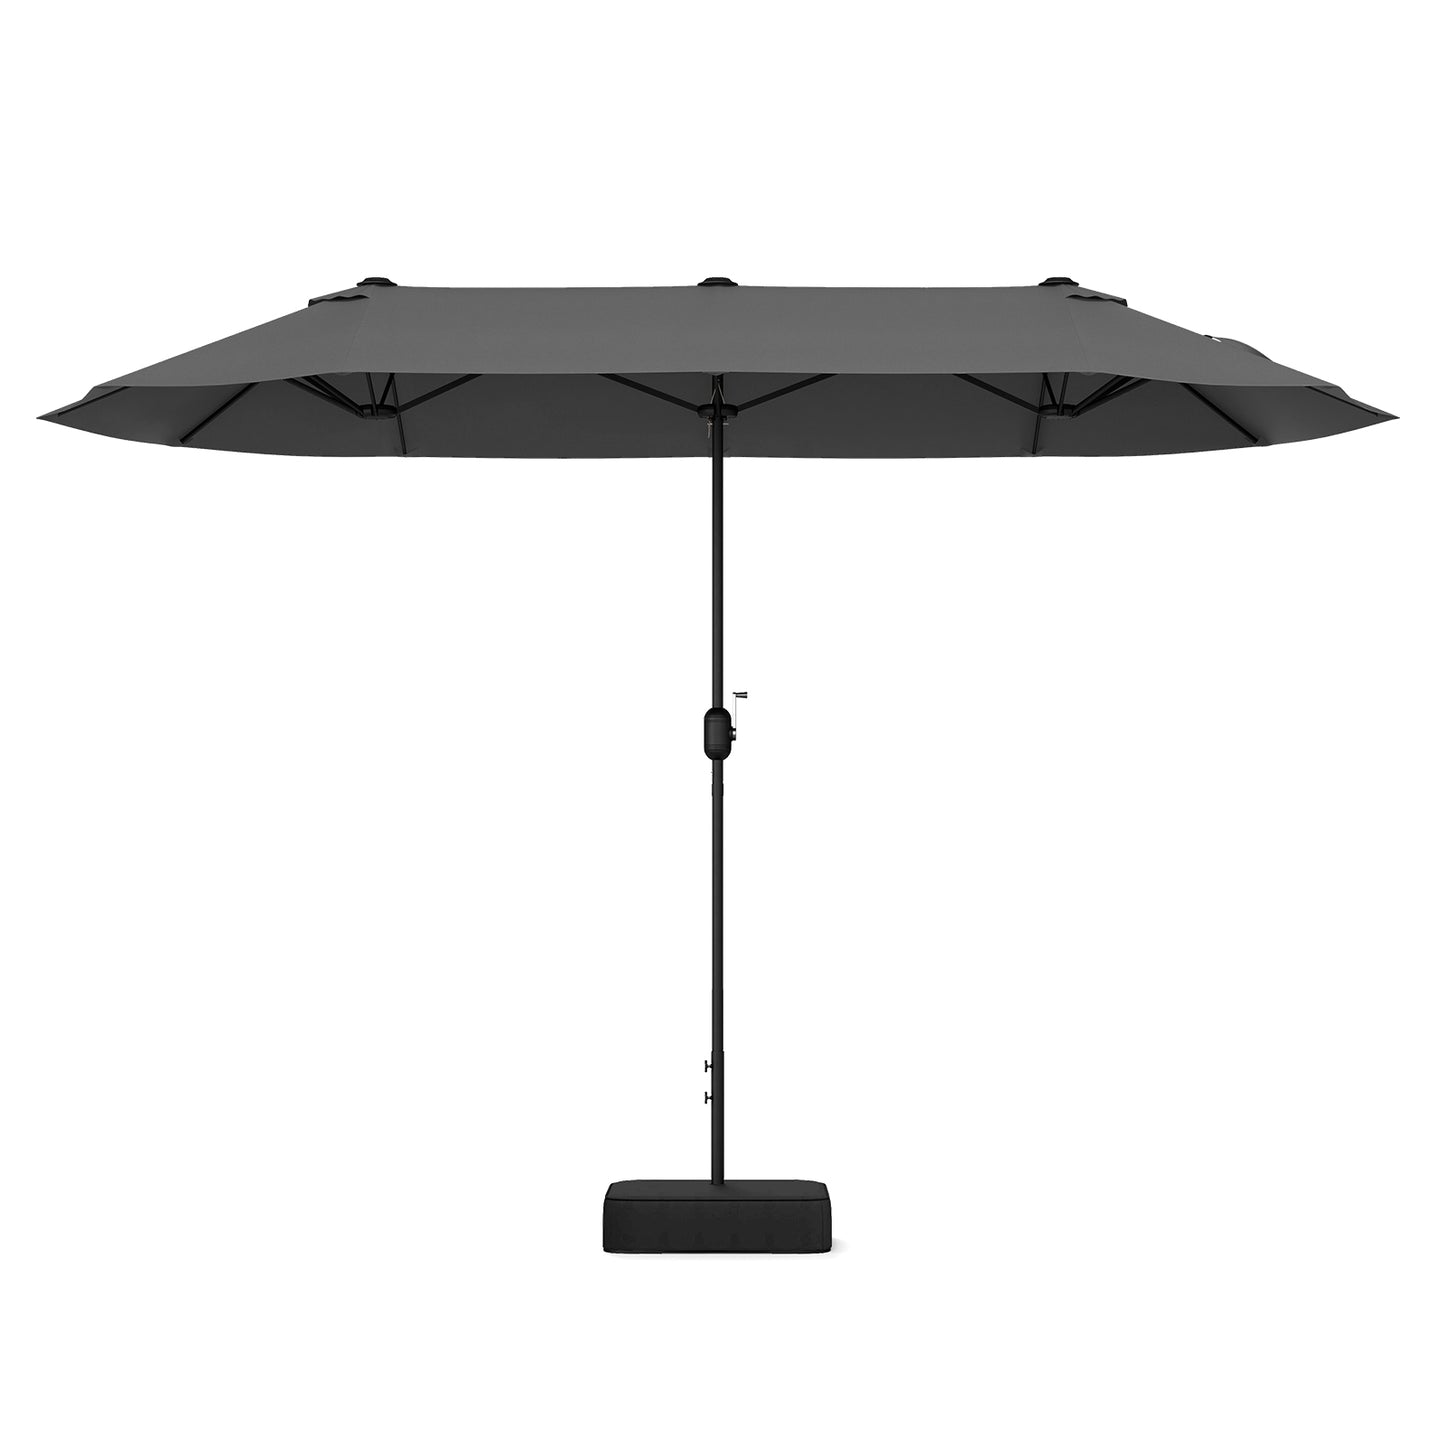 13 Feet Double-Sided Patio Twin Table Umbrella with Crank Handle-Gray